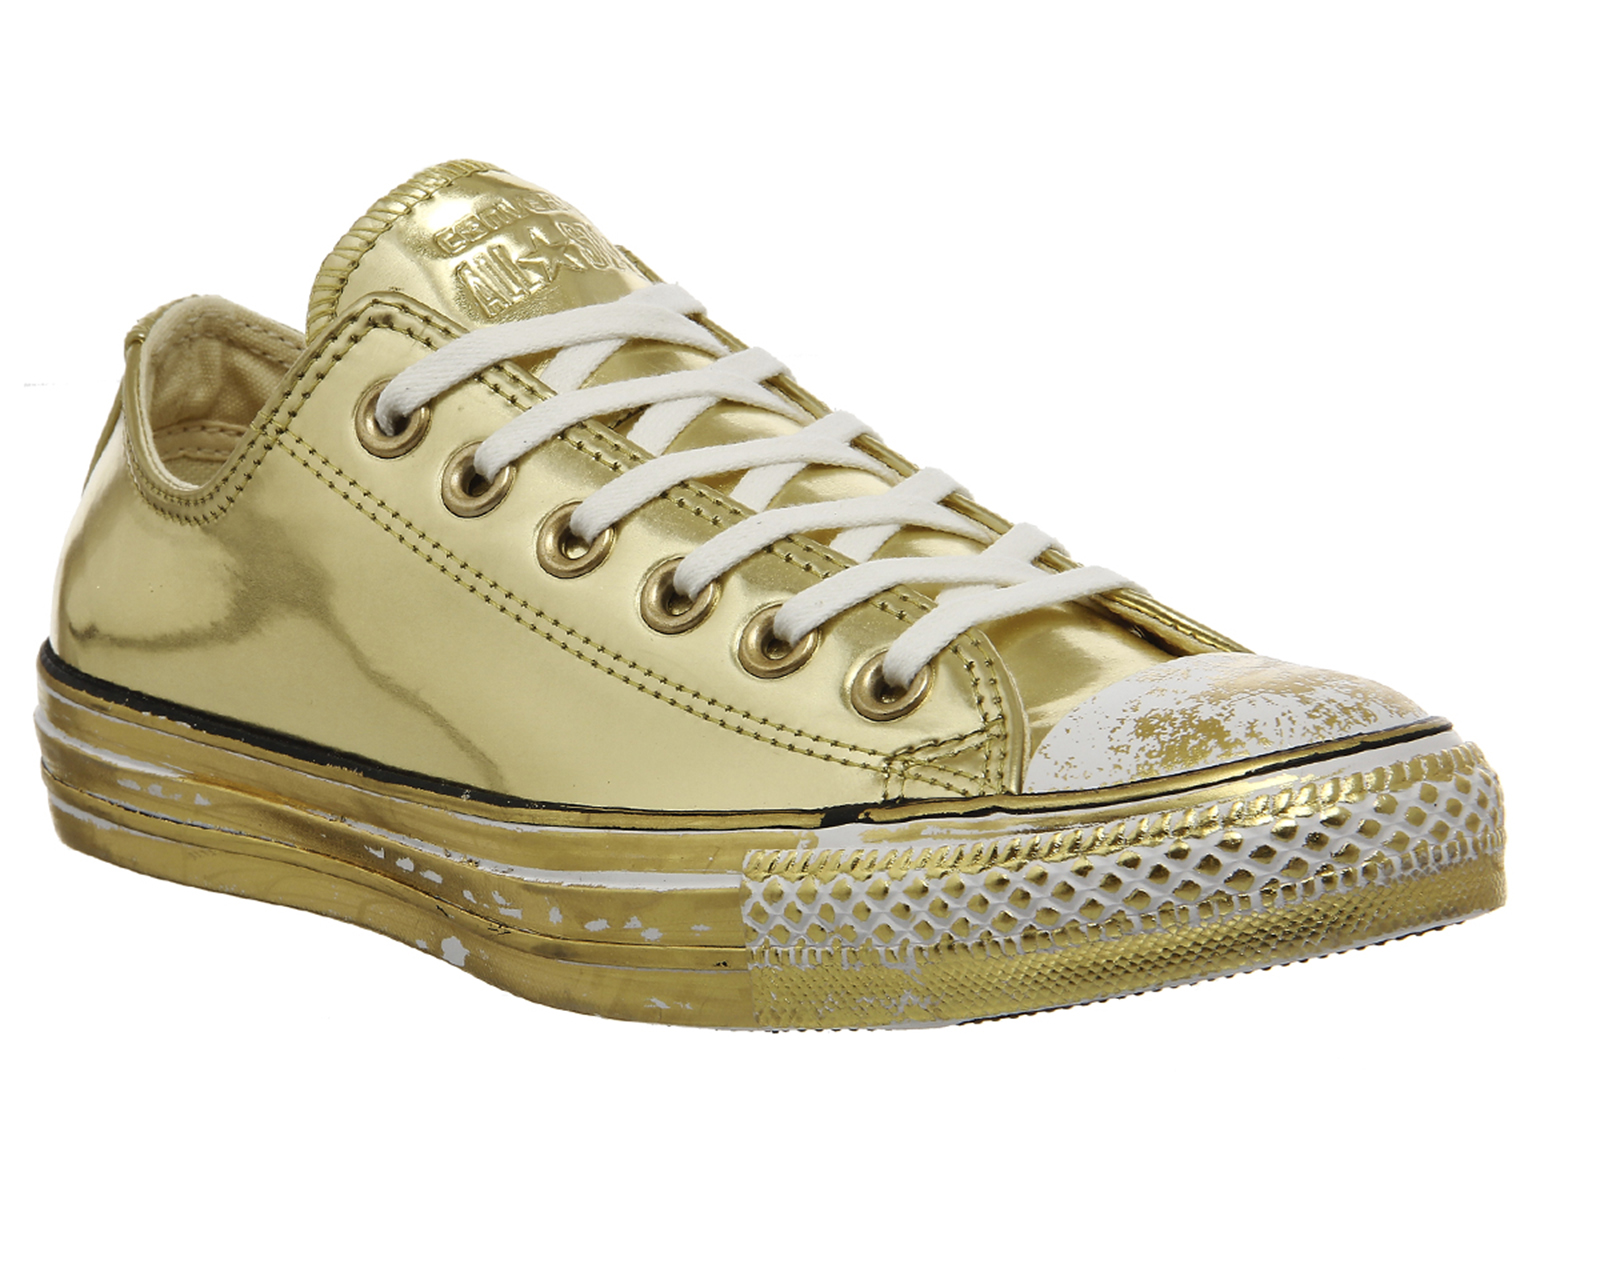 white and gold leather converse